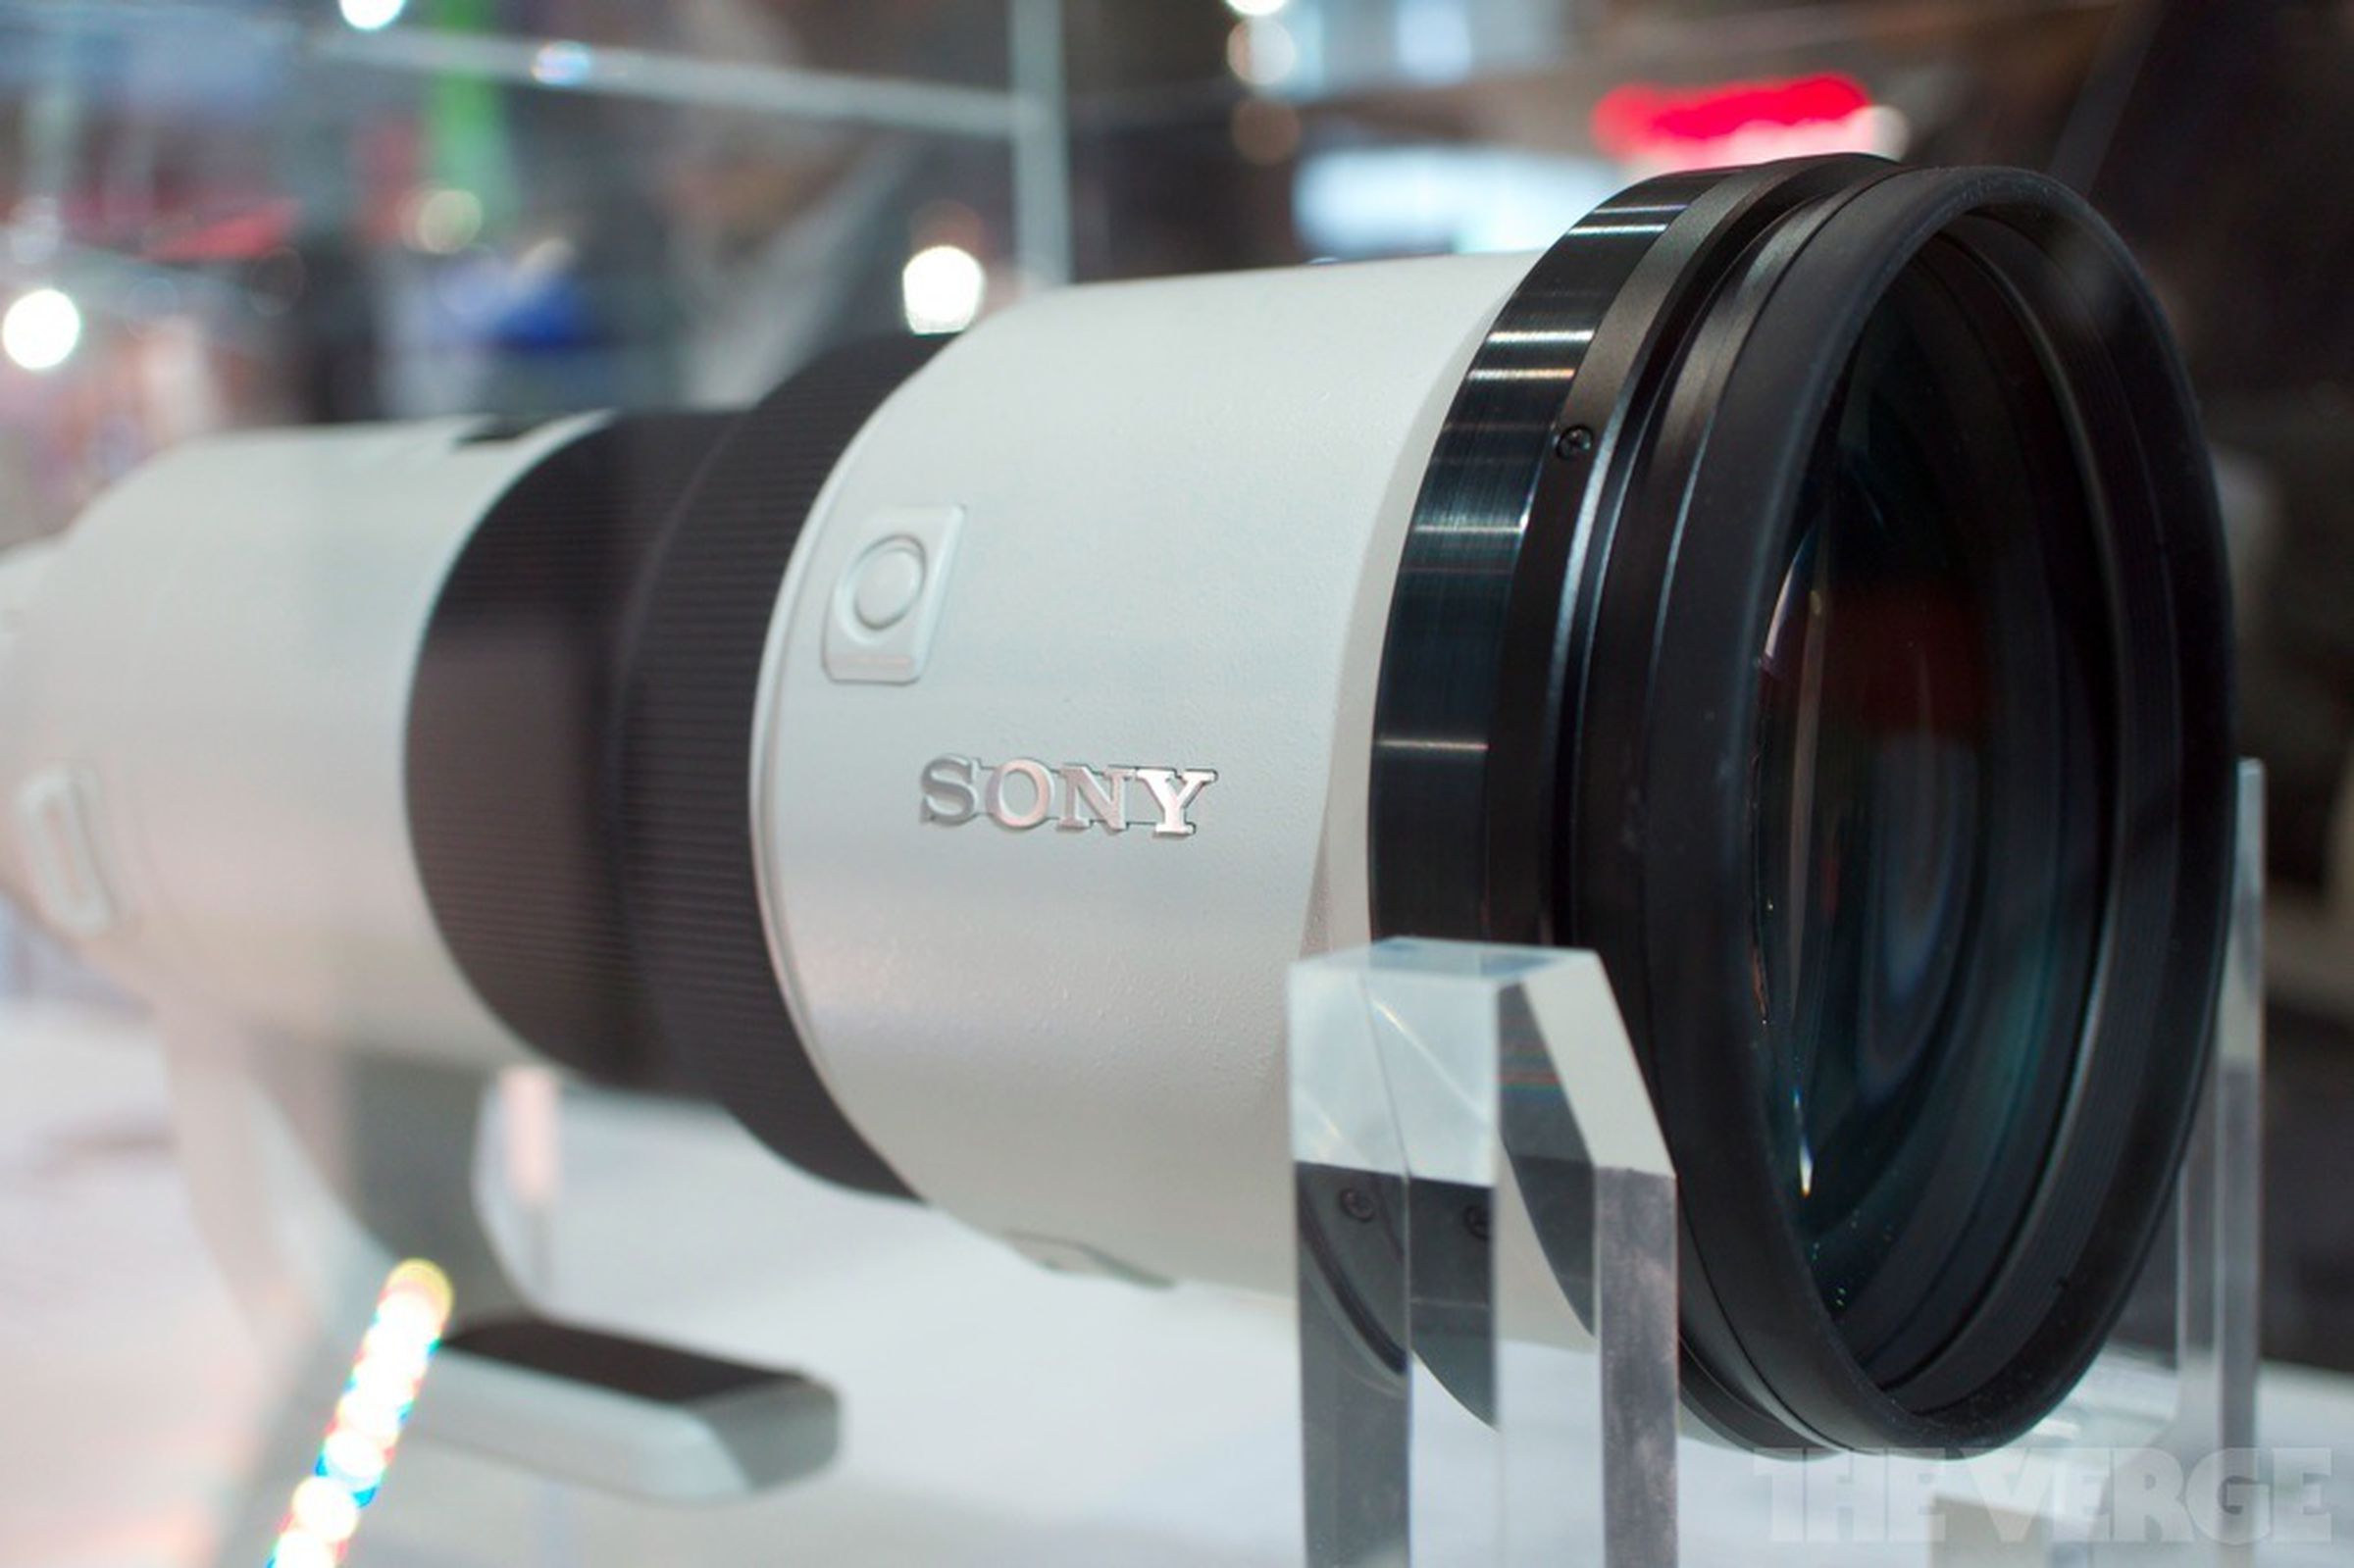 Sony 500mm f/4 G SSM lens hands-on pictures